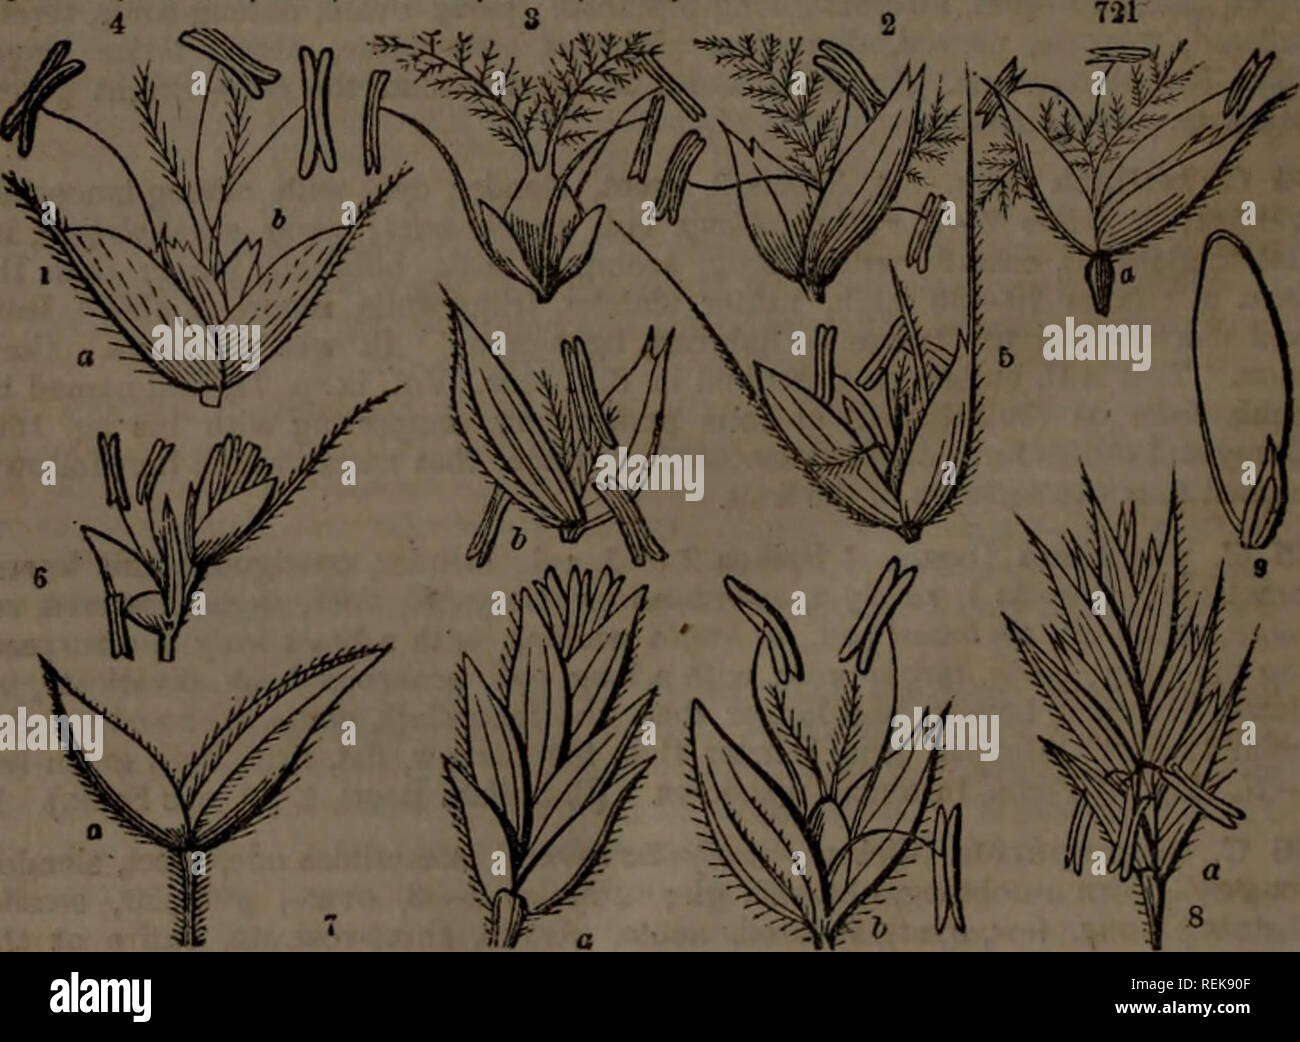 . Class-book of botany : being outlines of the structure, physiology and classification of plants : with a flora of the United States and Canada. Botany; Botany; Botany. no Order 15C—GRAMINK.'E. Order CLVI. GRAMINEvE. Grasses. Serbs, rarely woody or arborescent, with (mostly) hollow, jointed culms; with leaves alternate, distychous, on tubular sheaths split down to the nodes, and a litfuia (stipules) of membranous texture where the leaf joins the sheath. Flovxrs in little apikolots of 1 or several, with glumes distychously arranged, and collected into spike3, racemes or panicles. Glumes, the l Stock Photo